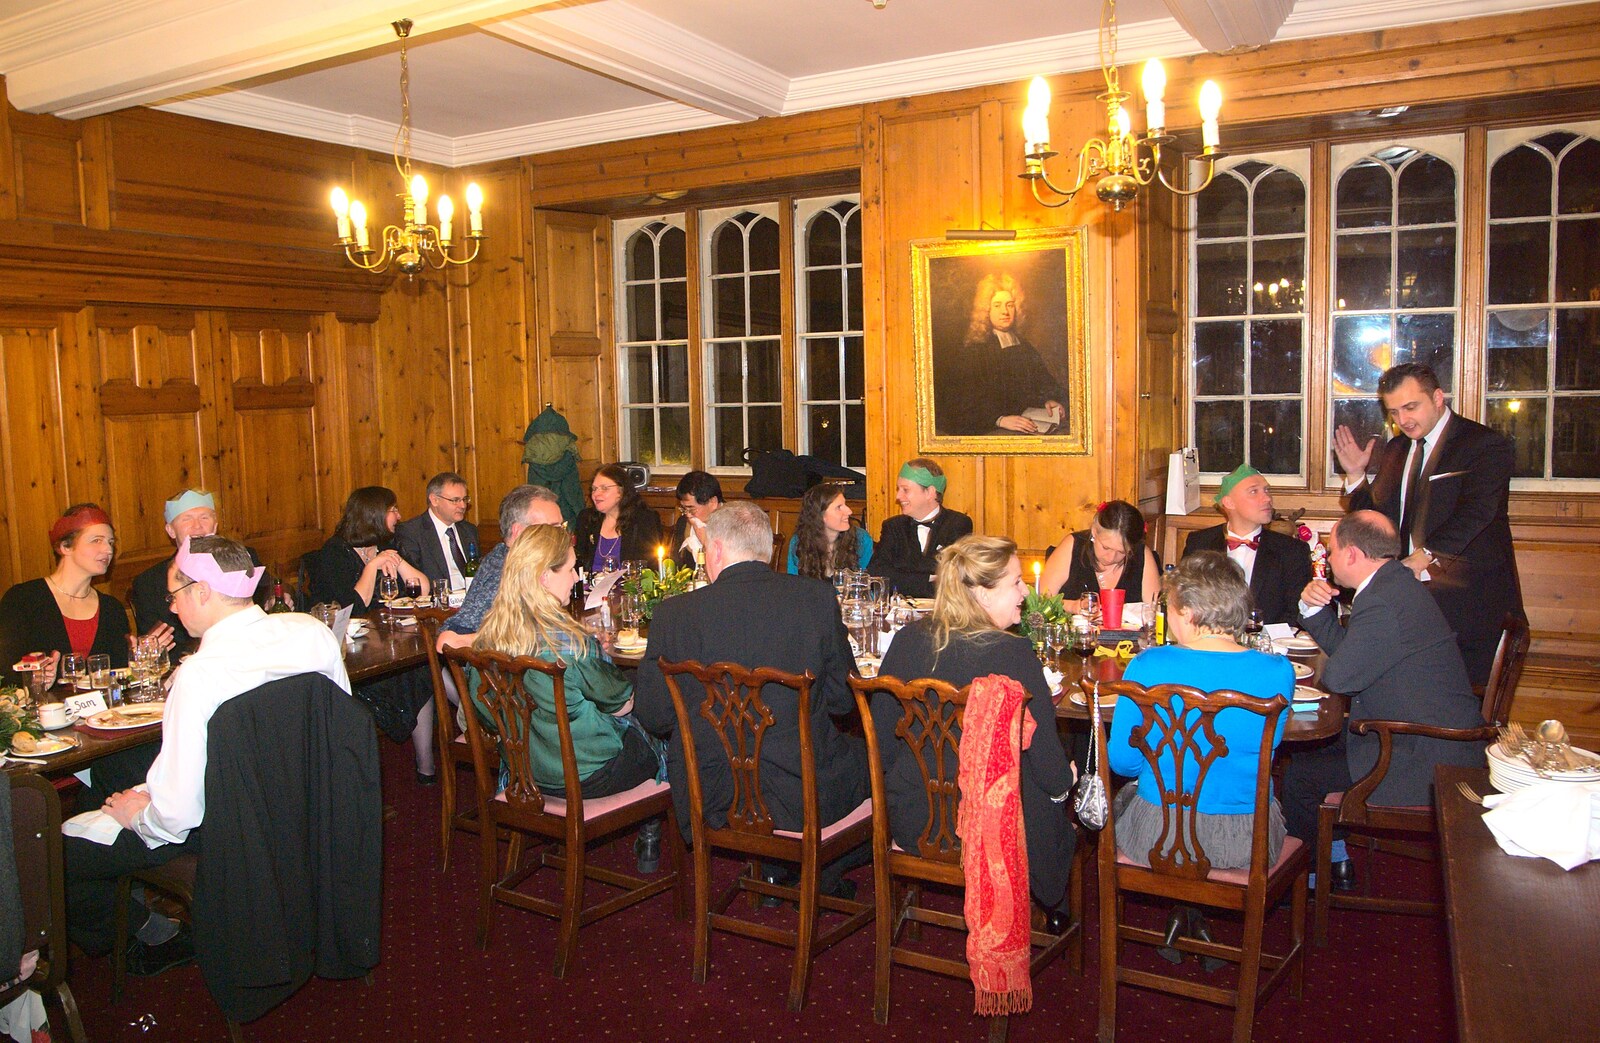 The magician visits the executive table from A Qualcomm Christmas, Christ's College, Cambridge - 8th December 2011